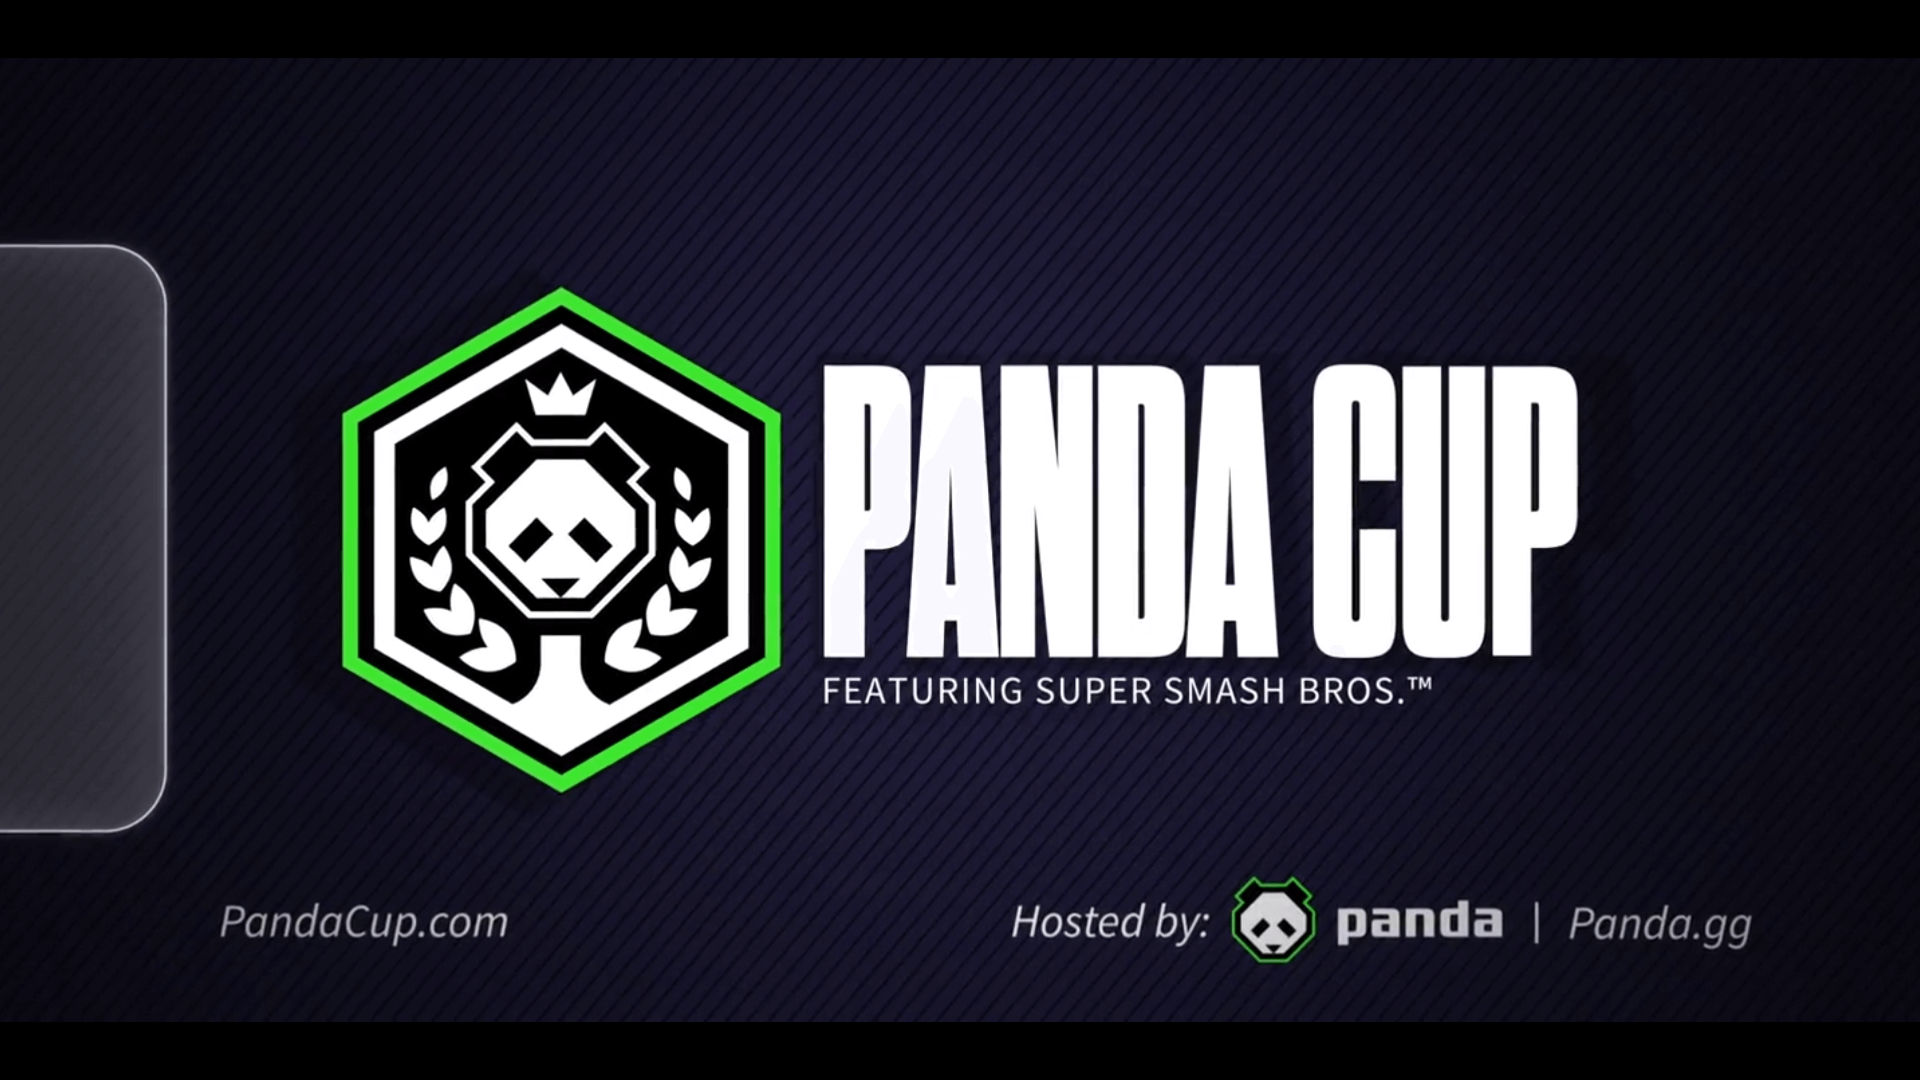 Panda Cup announced, the first officially licensed $100k event in NA